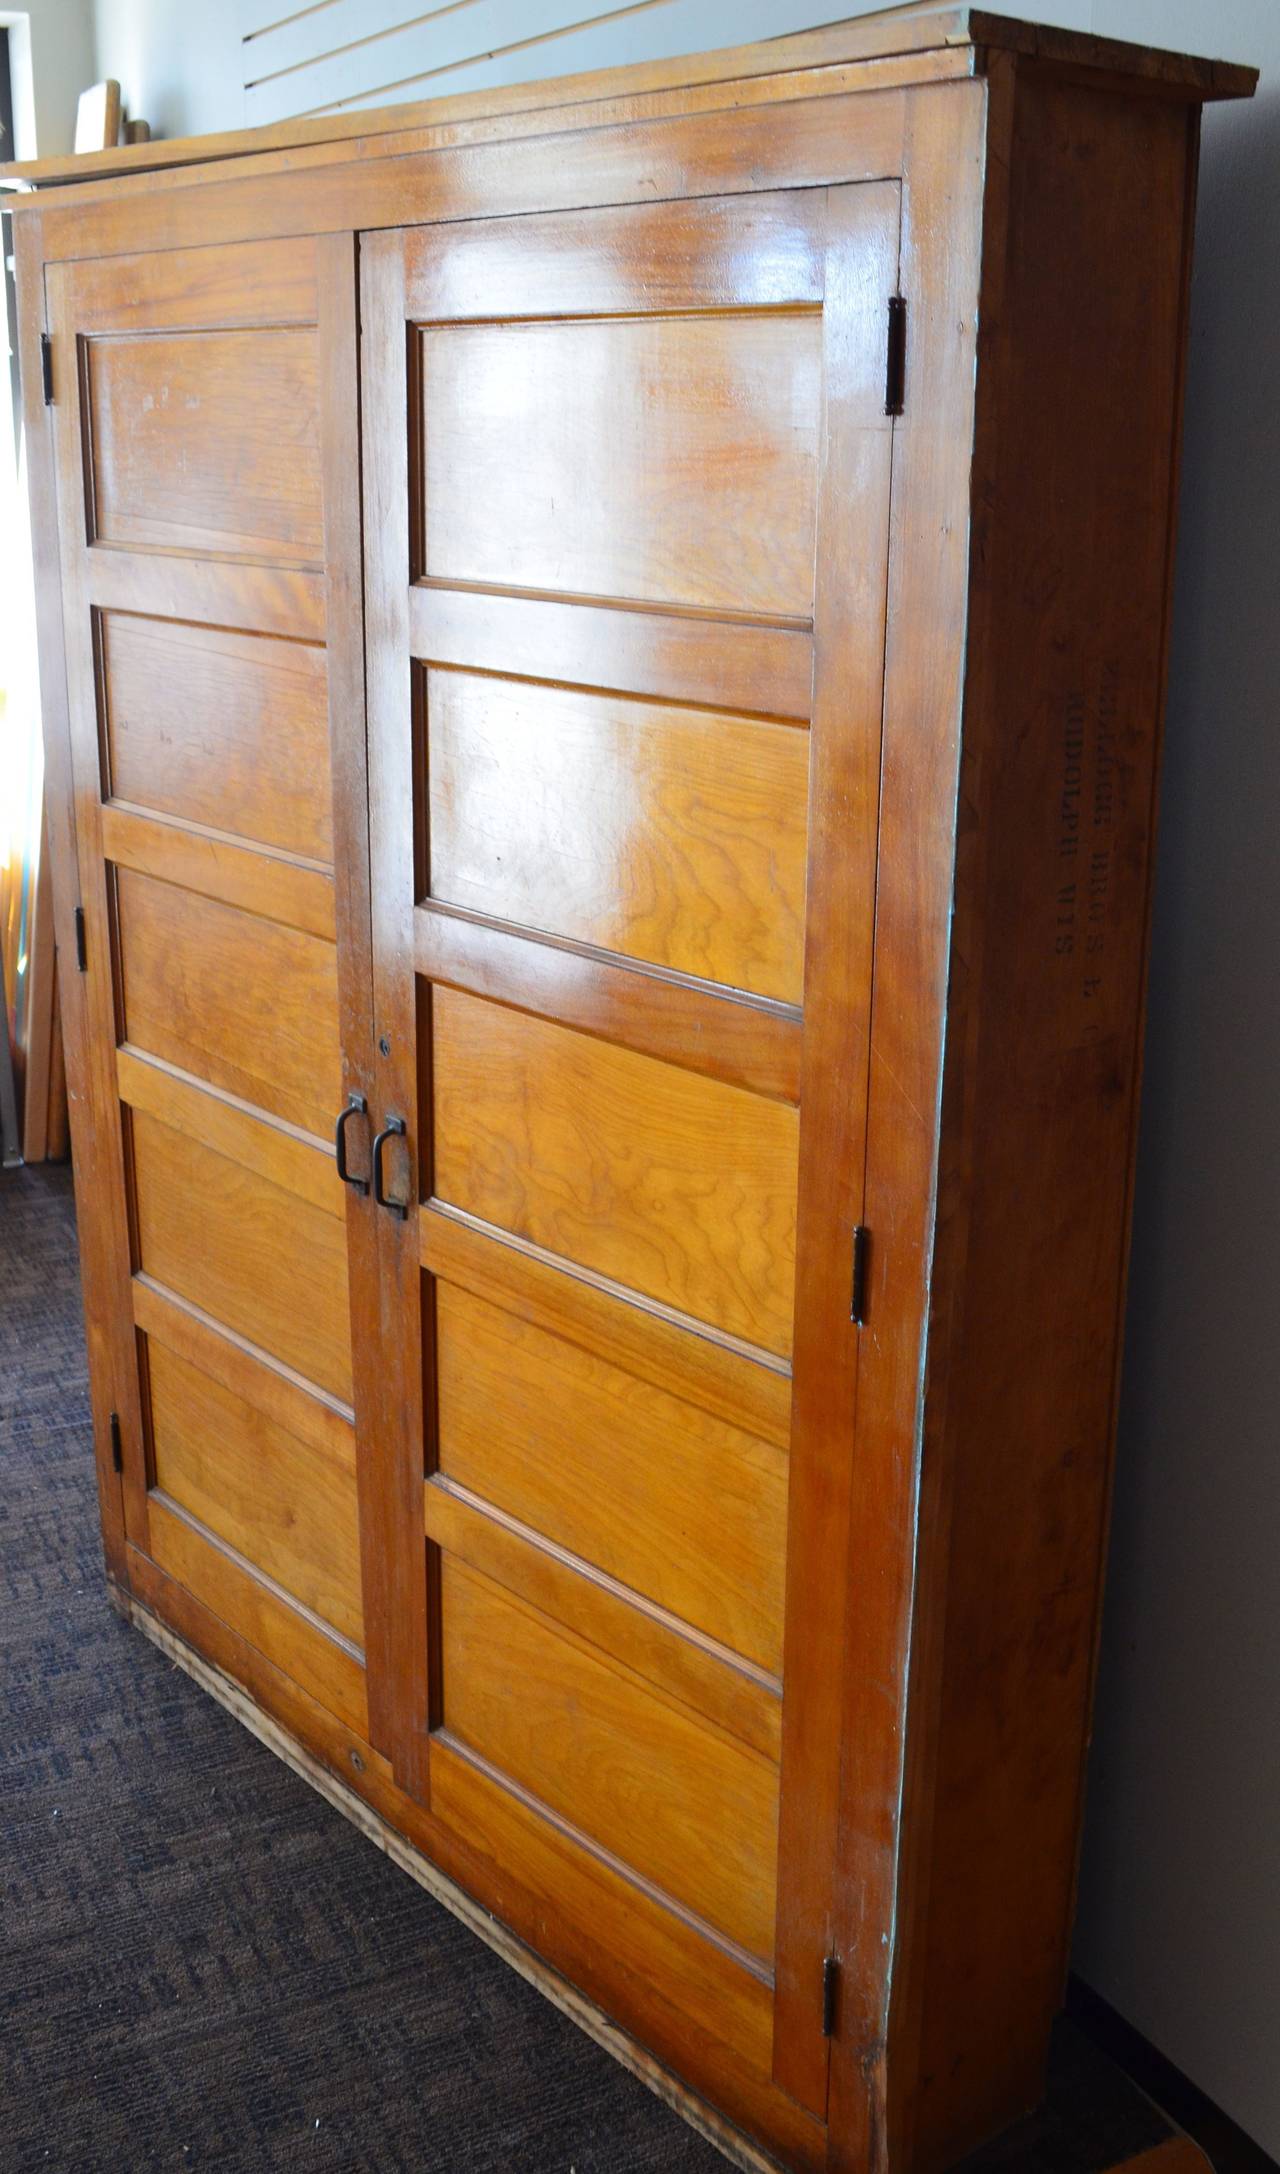 Early 20th Century School House Pine Cabinet Locker, circa 1920s; pair available